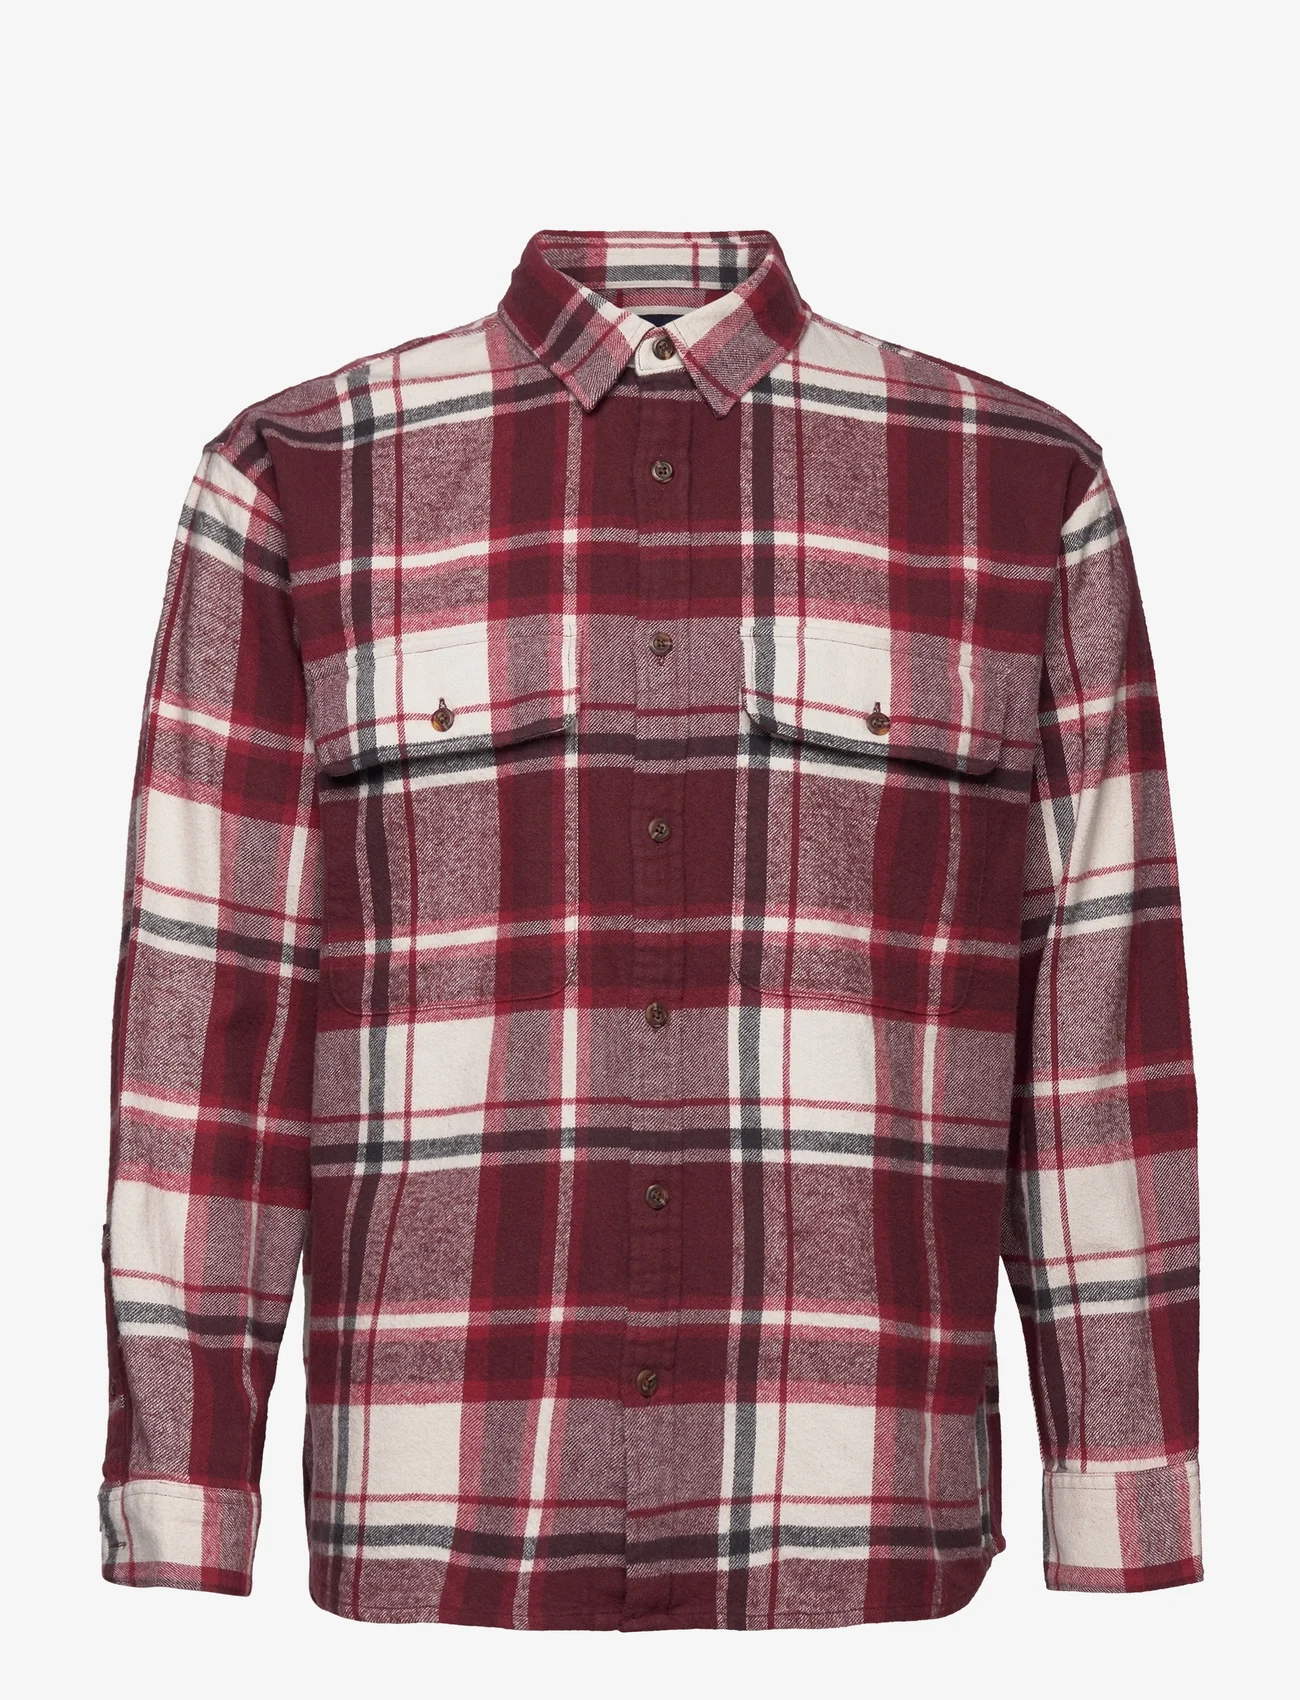 Abercrombie & Fitch - ANF MENS WOVENS - ternede skjorter - burgundy plaid - 0